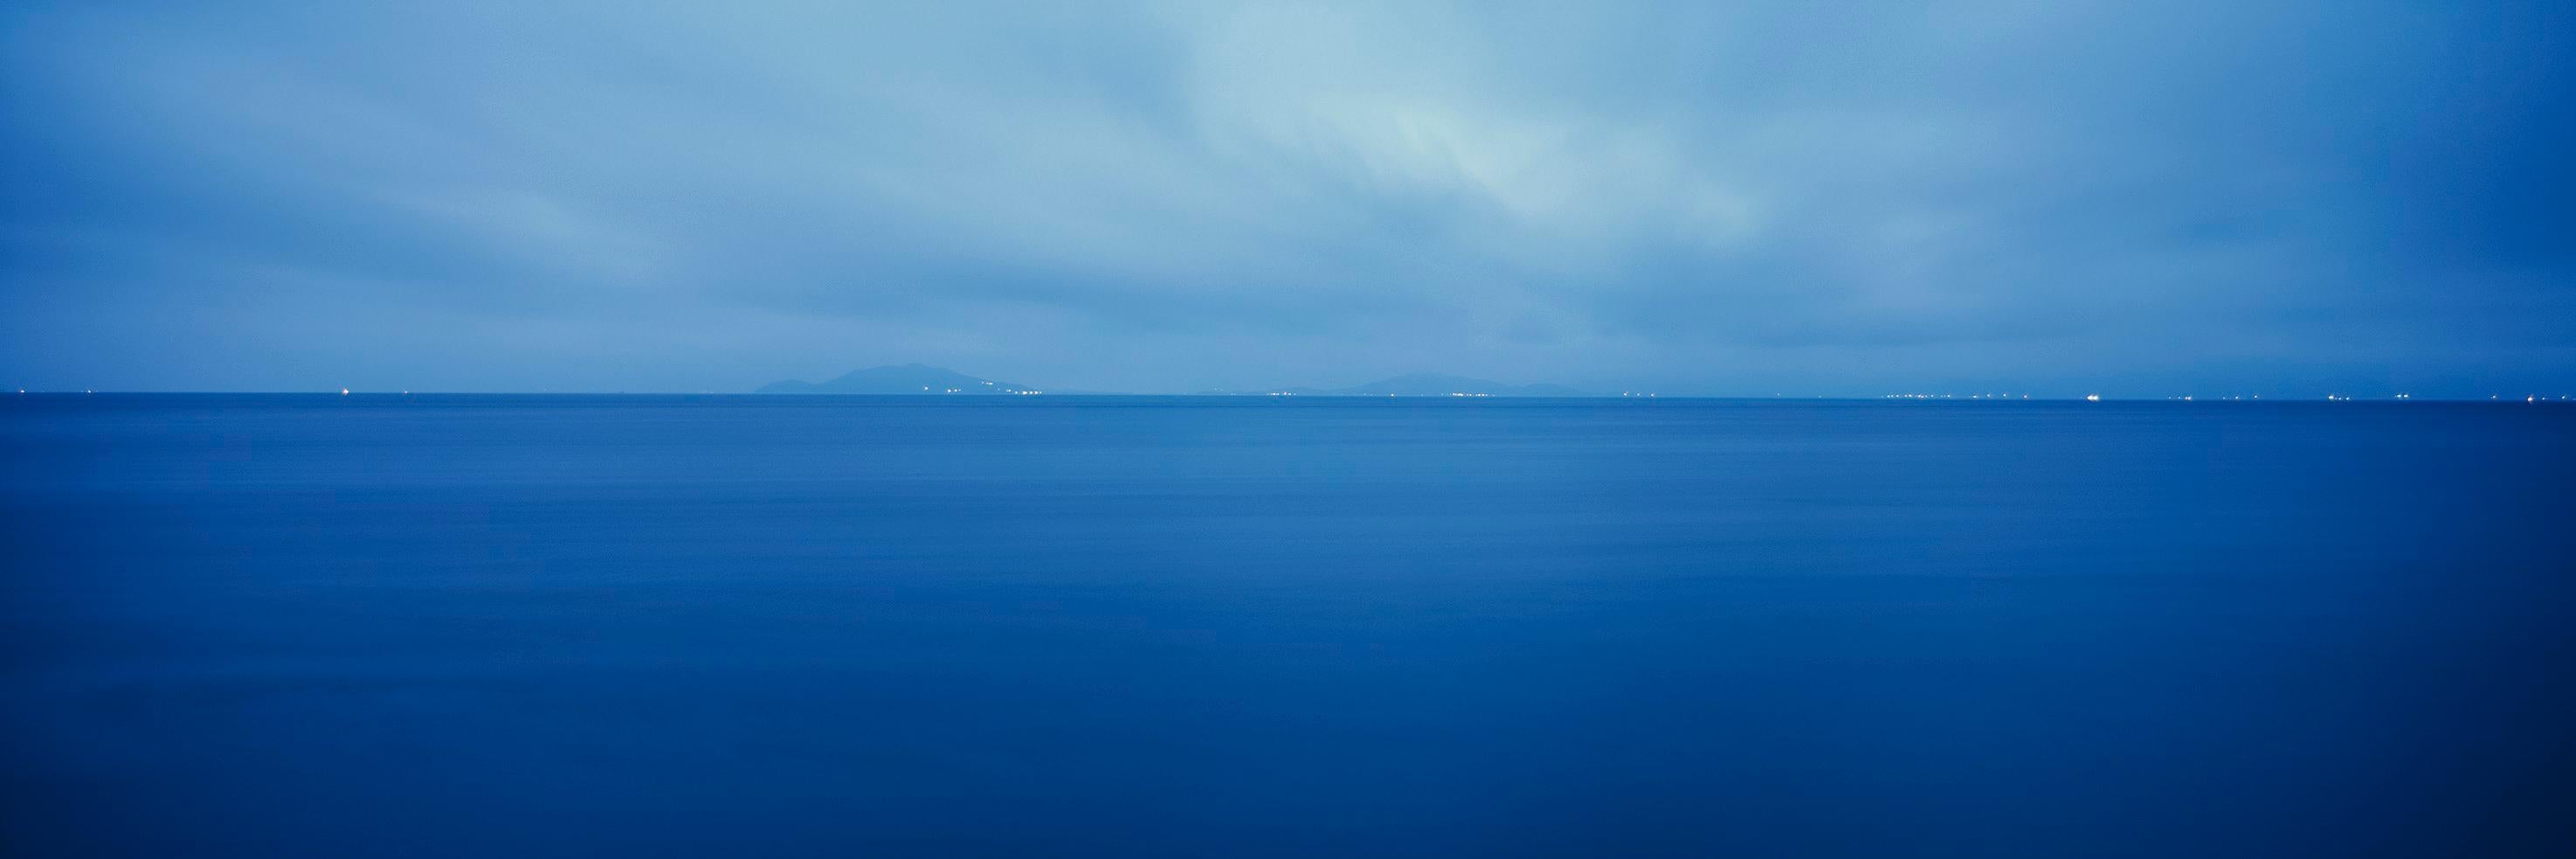 Young Jin Choi Landscape Photograph - Geojeon (Photograph, Print, Blue Skies, Peaceful Waters, Ocean, Open Sea)